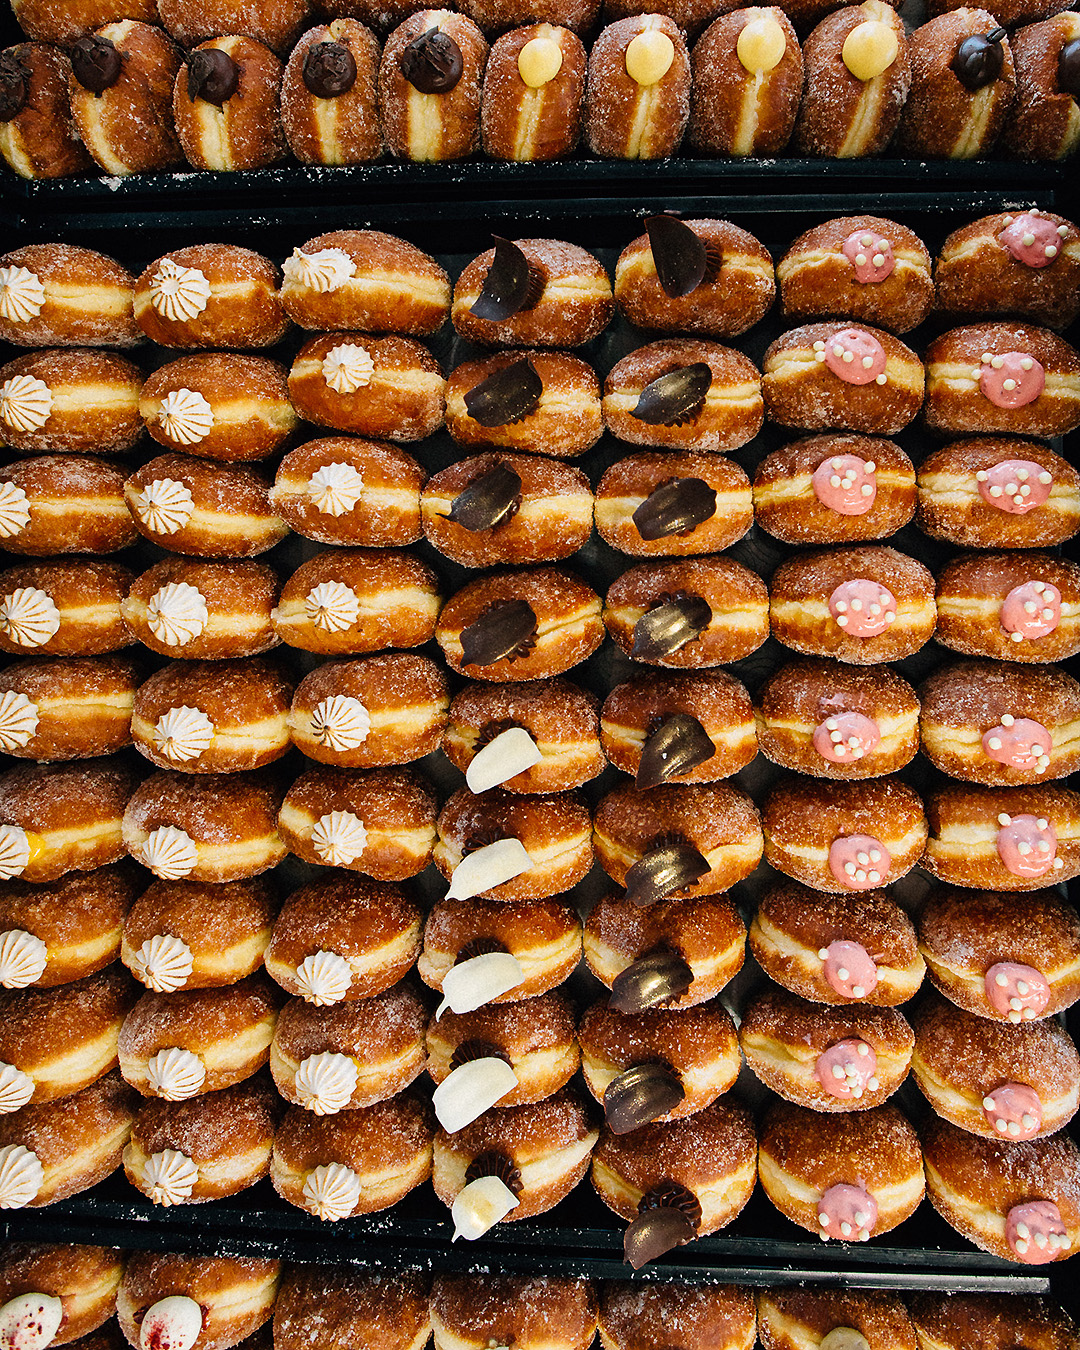 A dizzying array of freshly made doughnuts at Grownup Donuts.